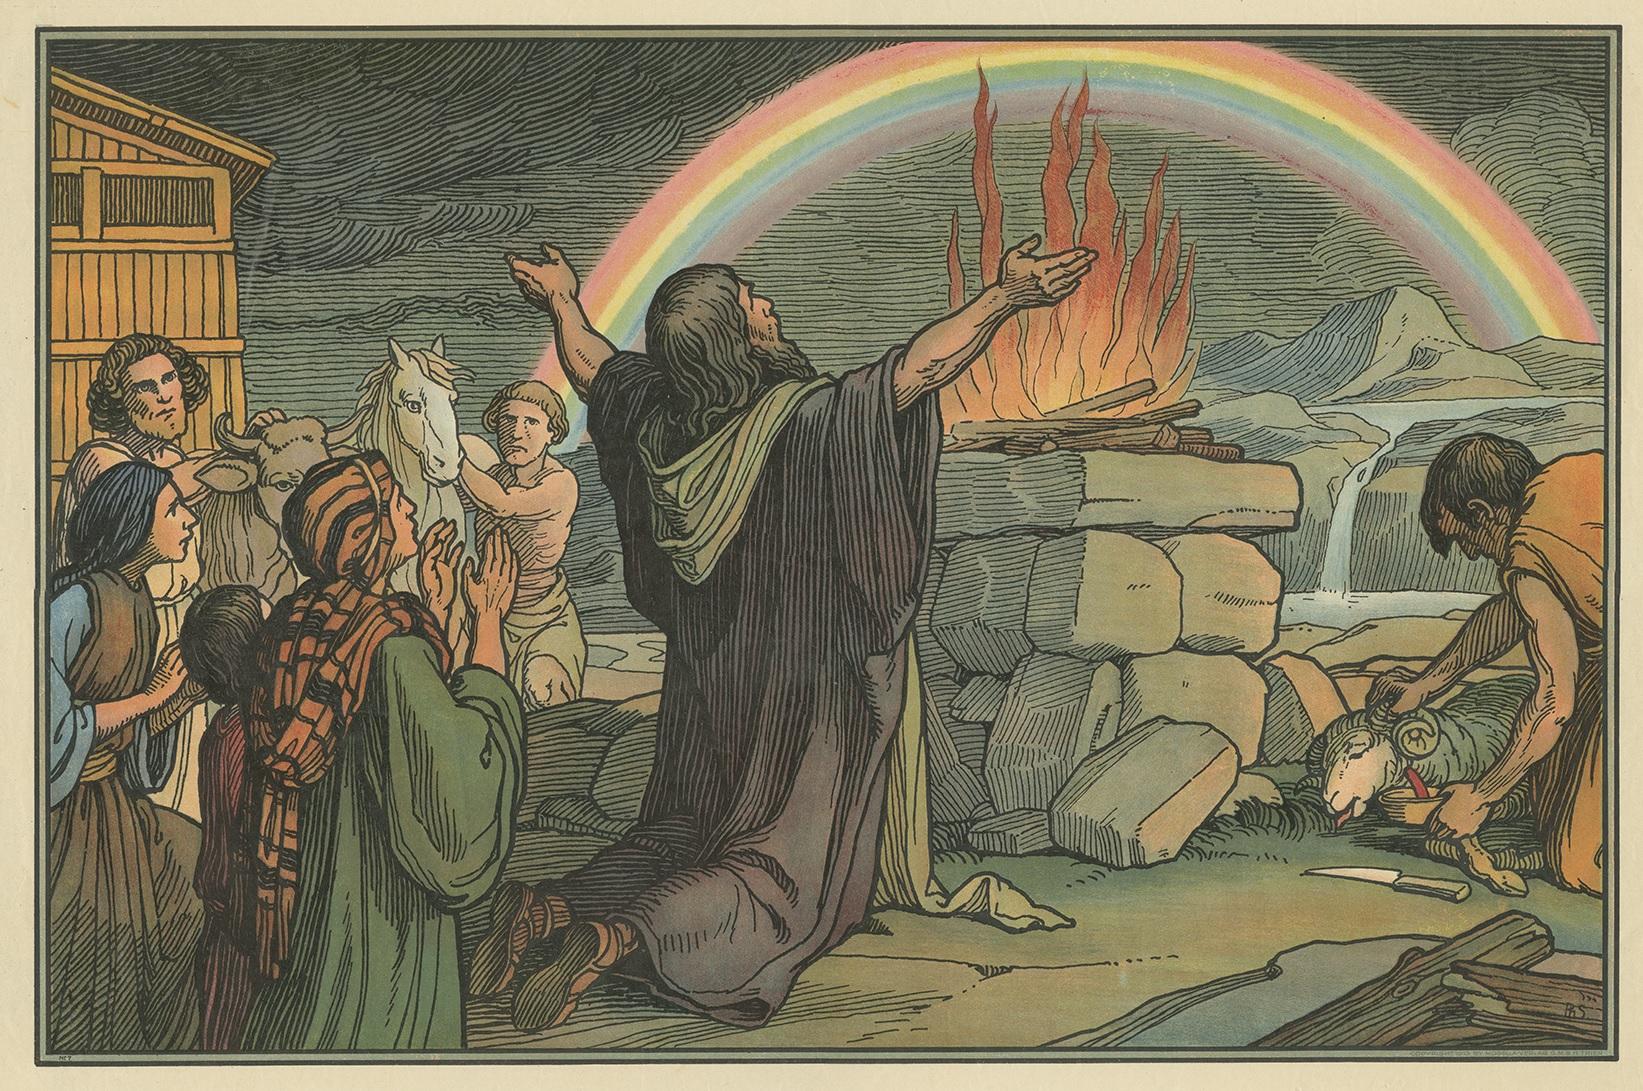 Large antique print of Noah's Offering. Published by Mosella-Verlag, 1913. This print originates from a series titled 'Kathol. Schulbibelwerk von Dr. Ecker'.